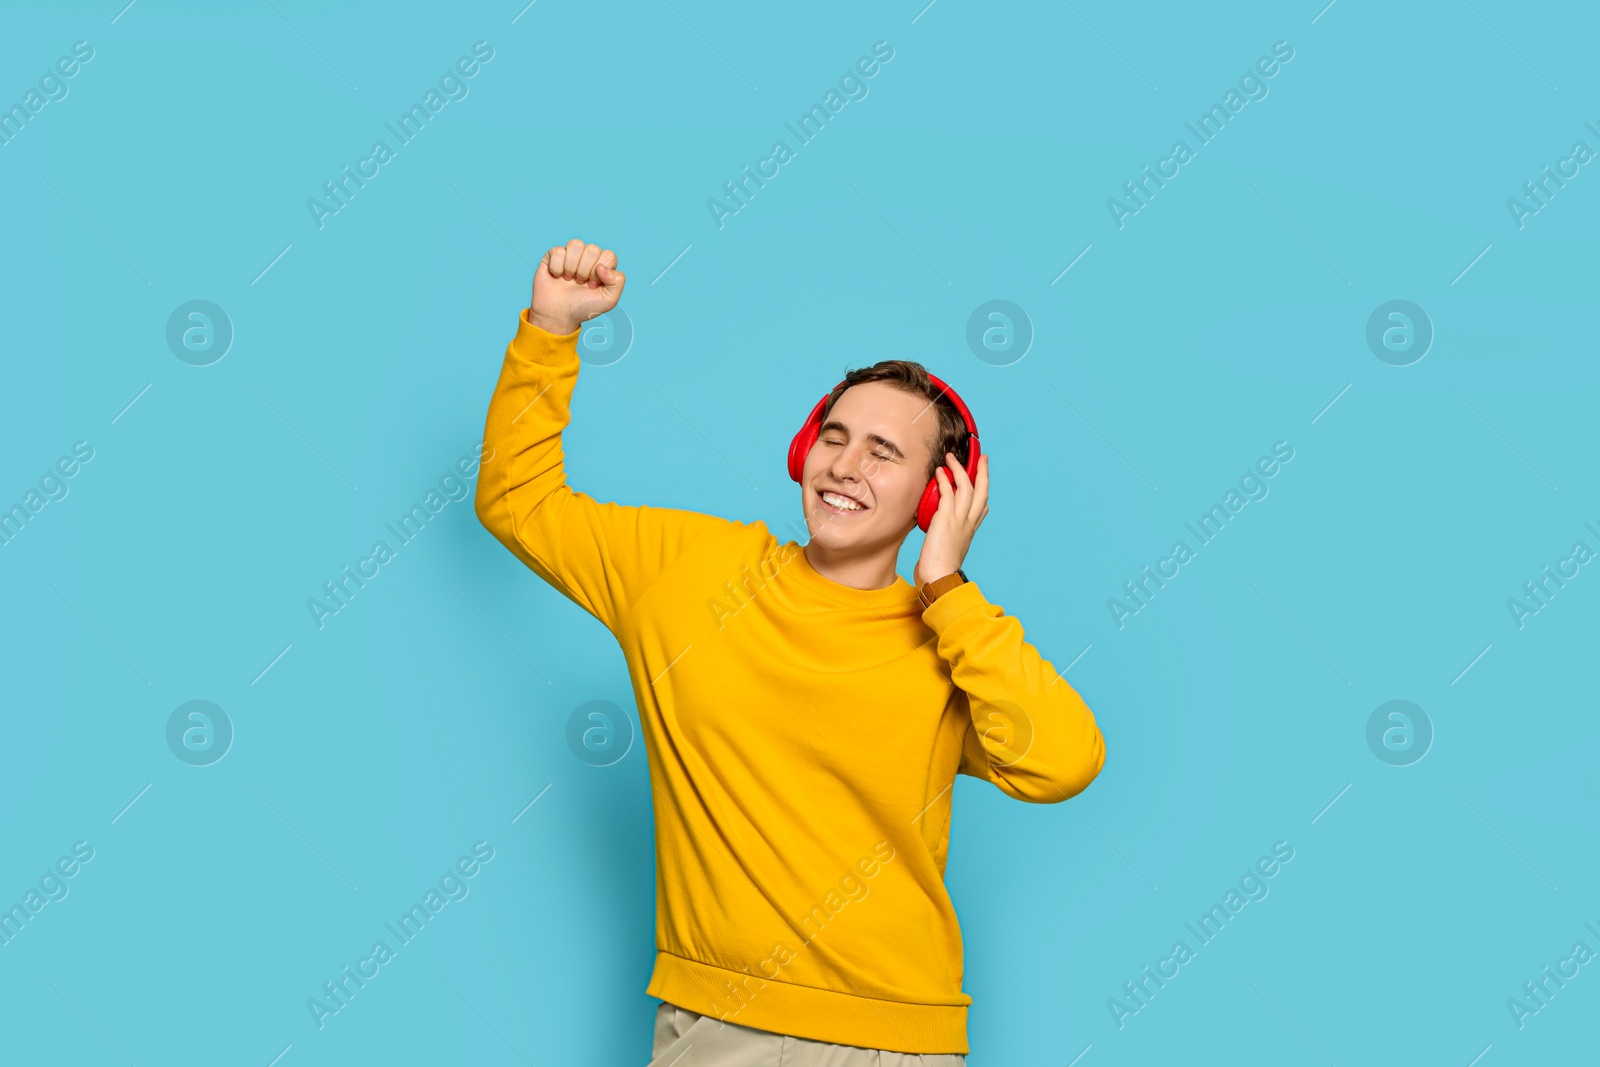 Photo of Handsome young man with headphones dancing on light blue background